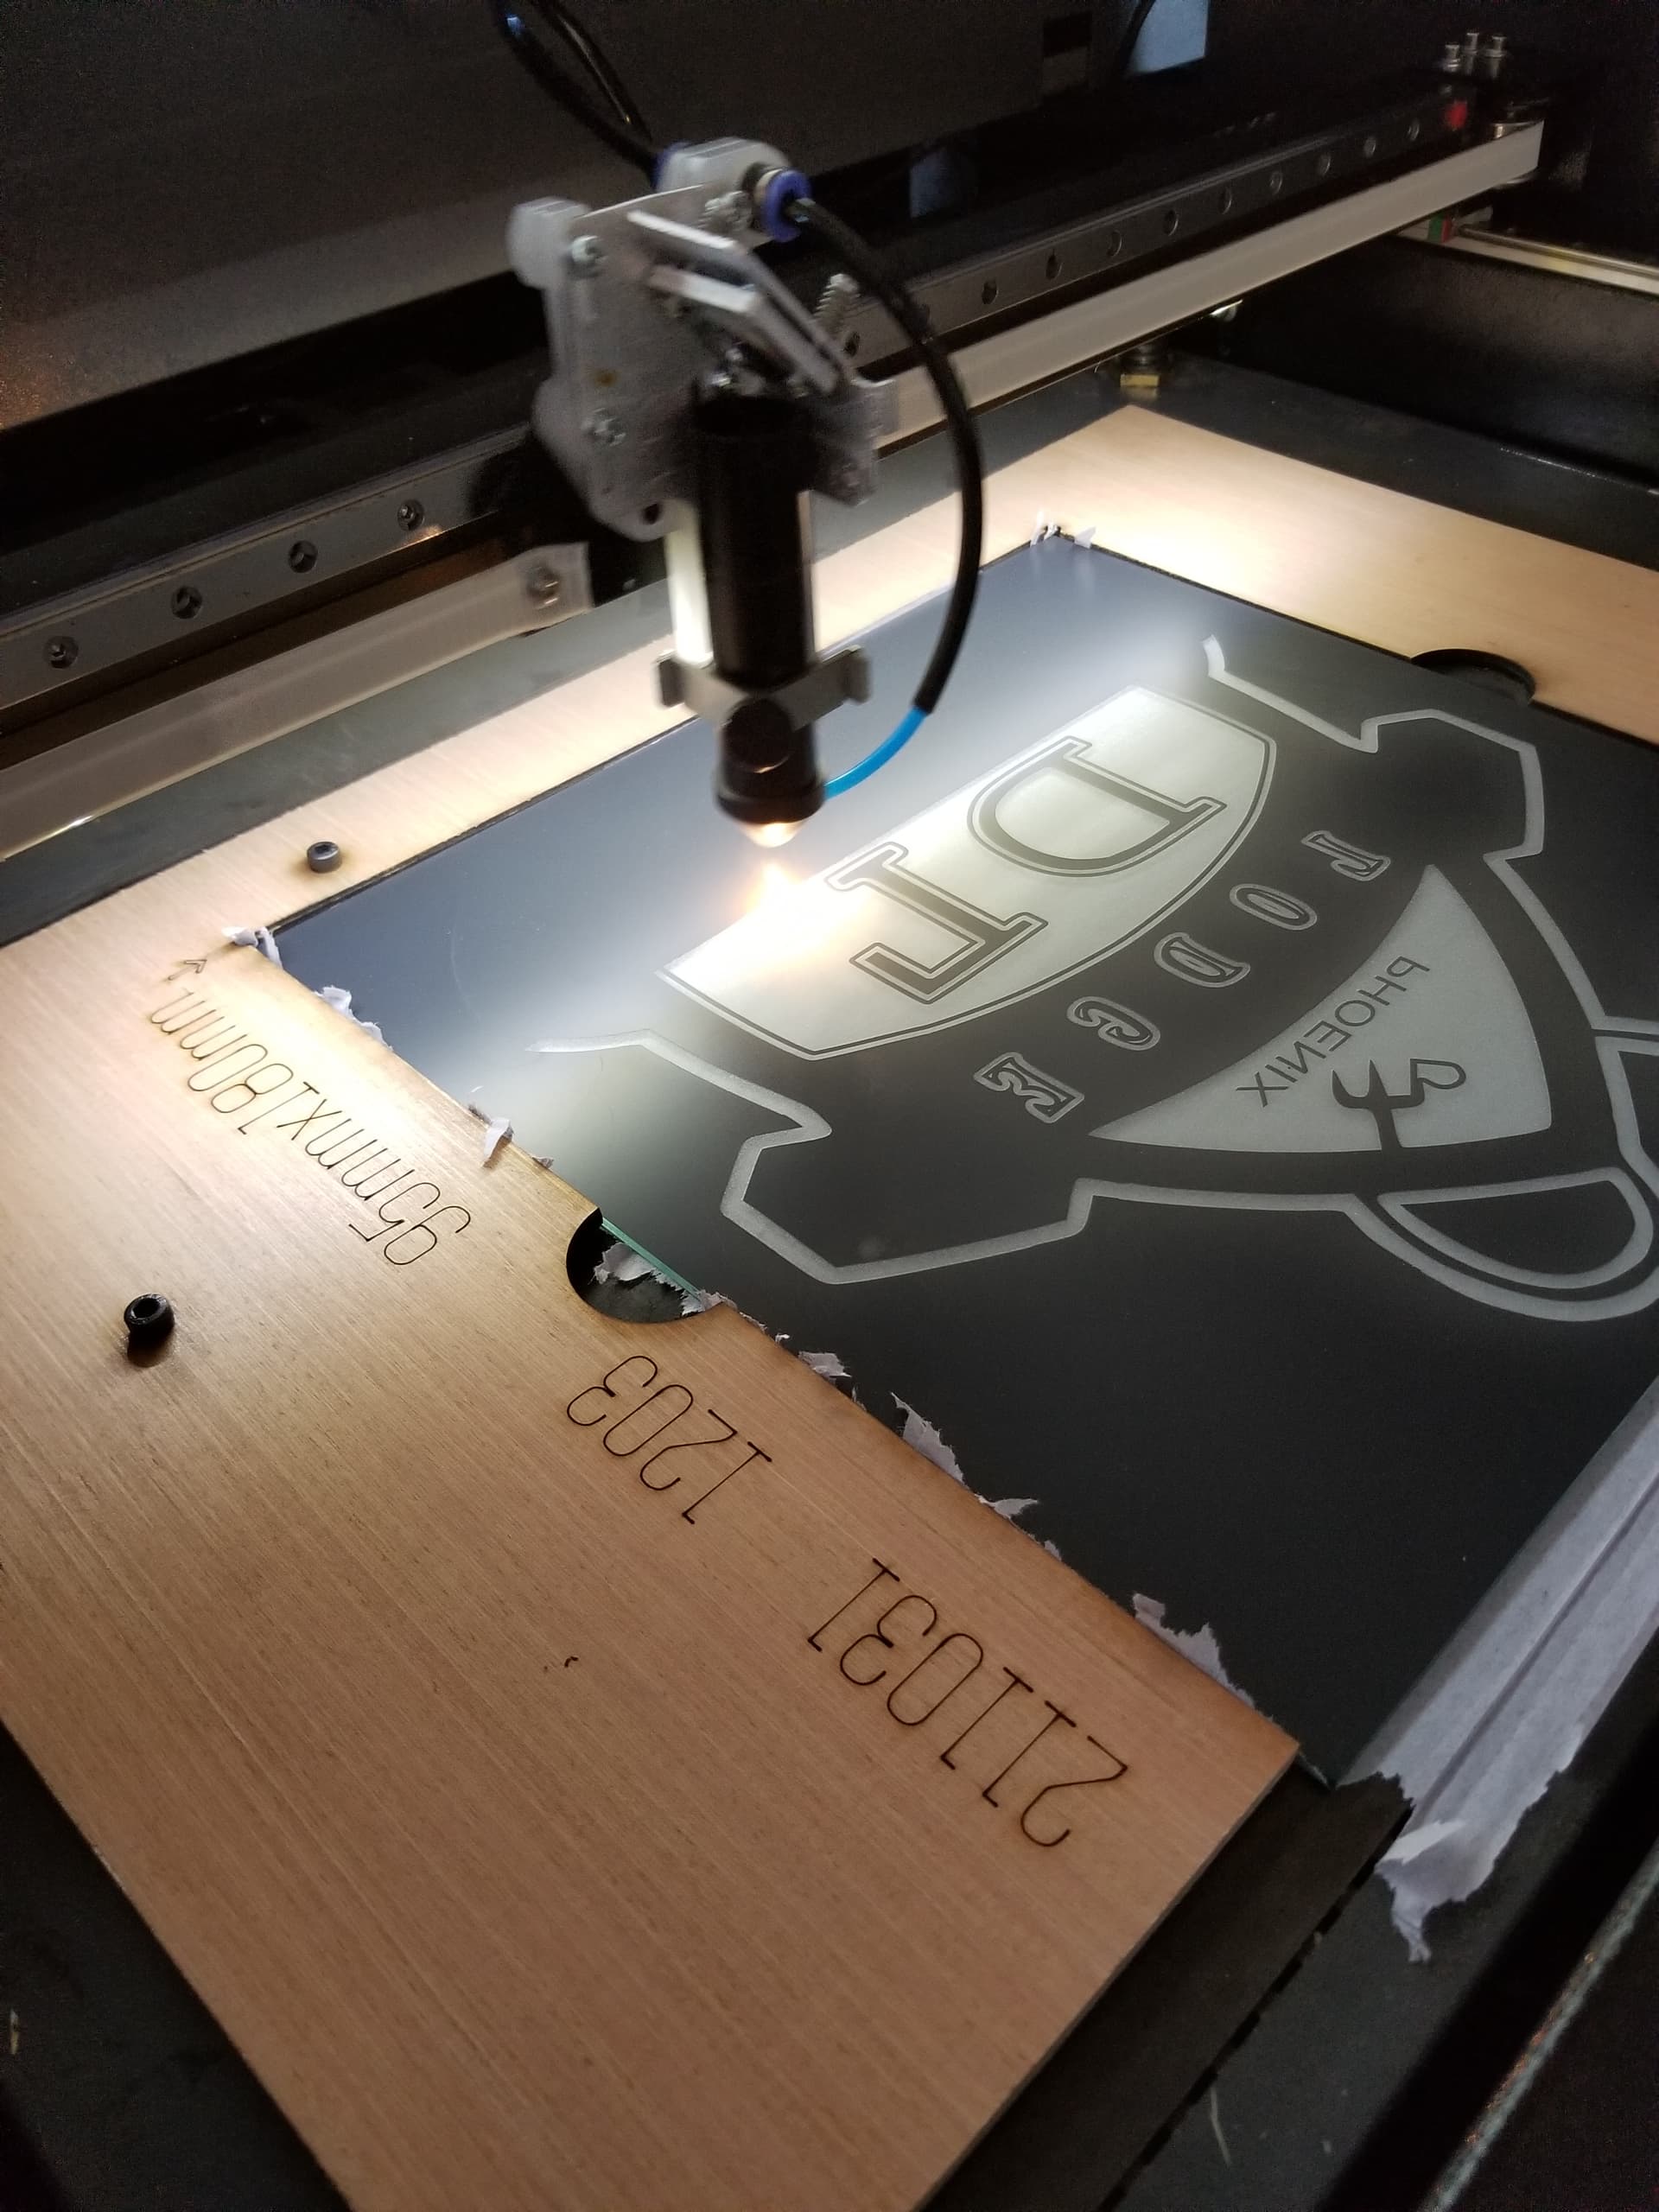 Omtech 60w laser burning while engraving and firing continiousy - LightBurn  Hardware Compatibility - LightBurn Software Forum